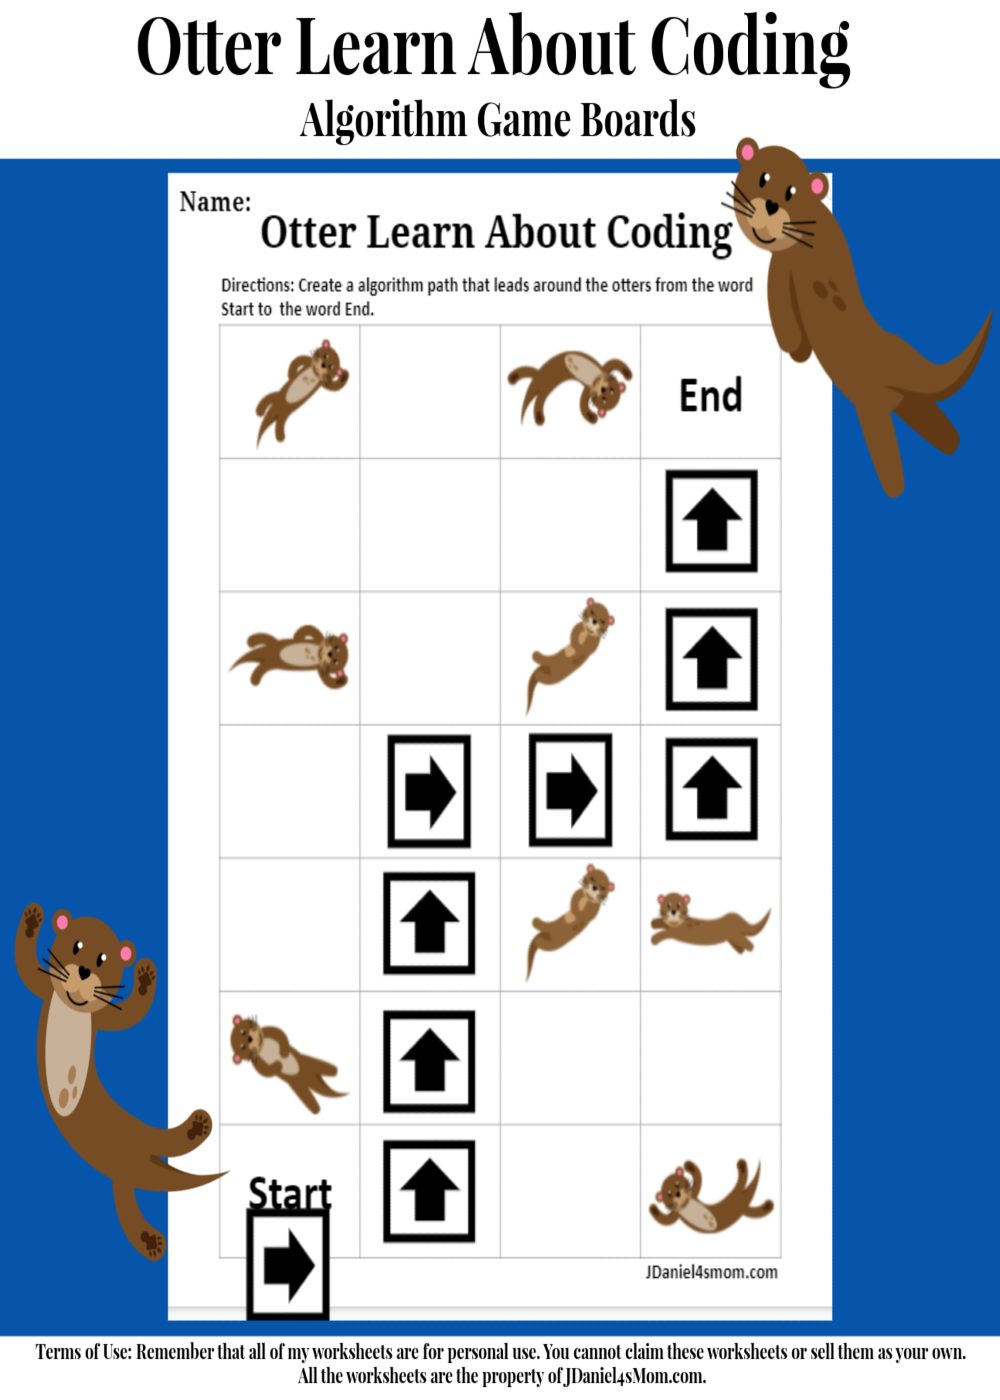 Otter Learn About Coding Algorithm Game Boards Long Rectangle